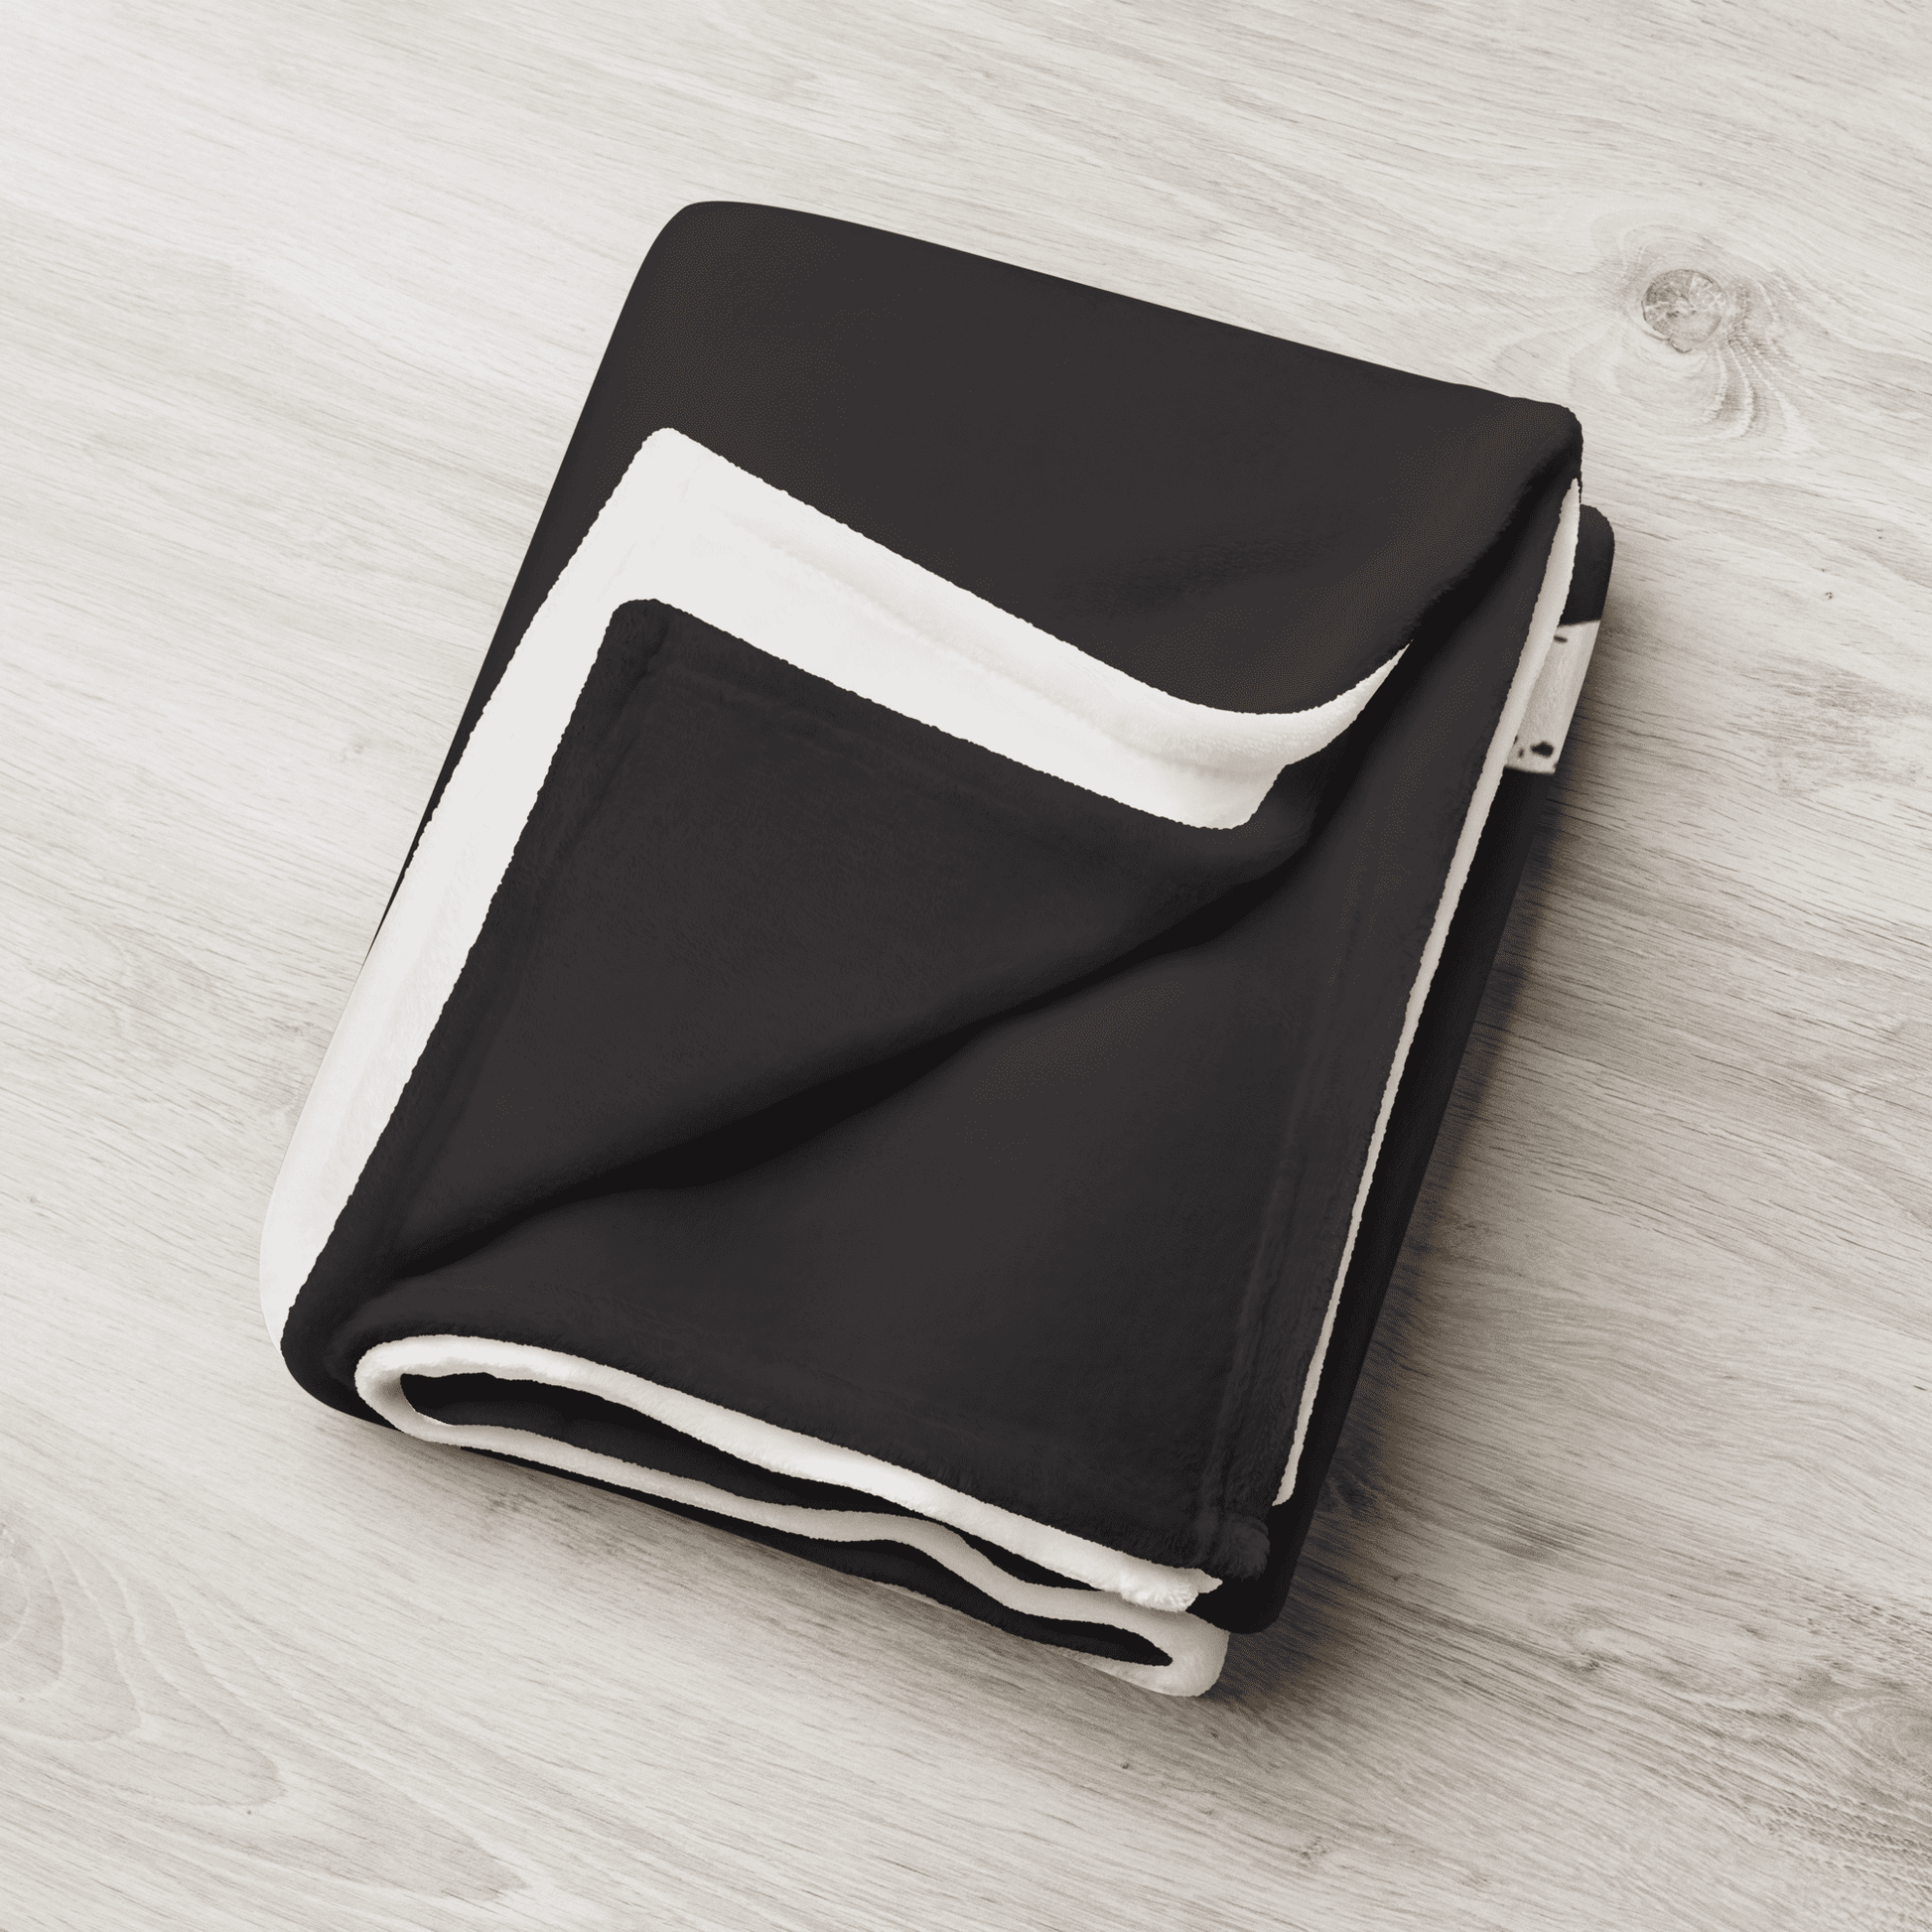 Detailed view of the folded black bitcoin blanket.